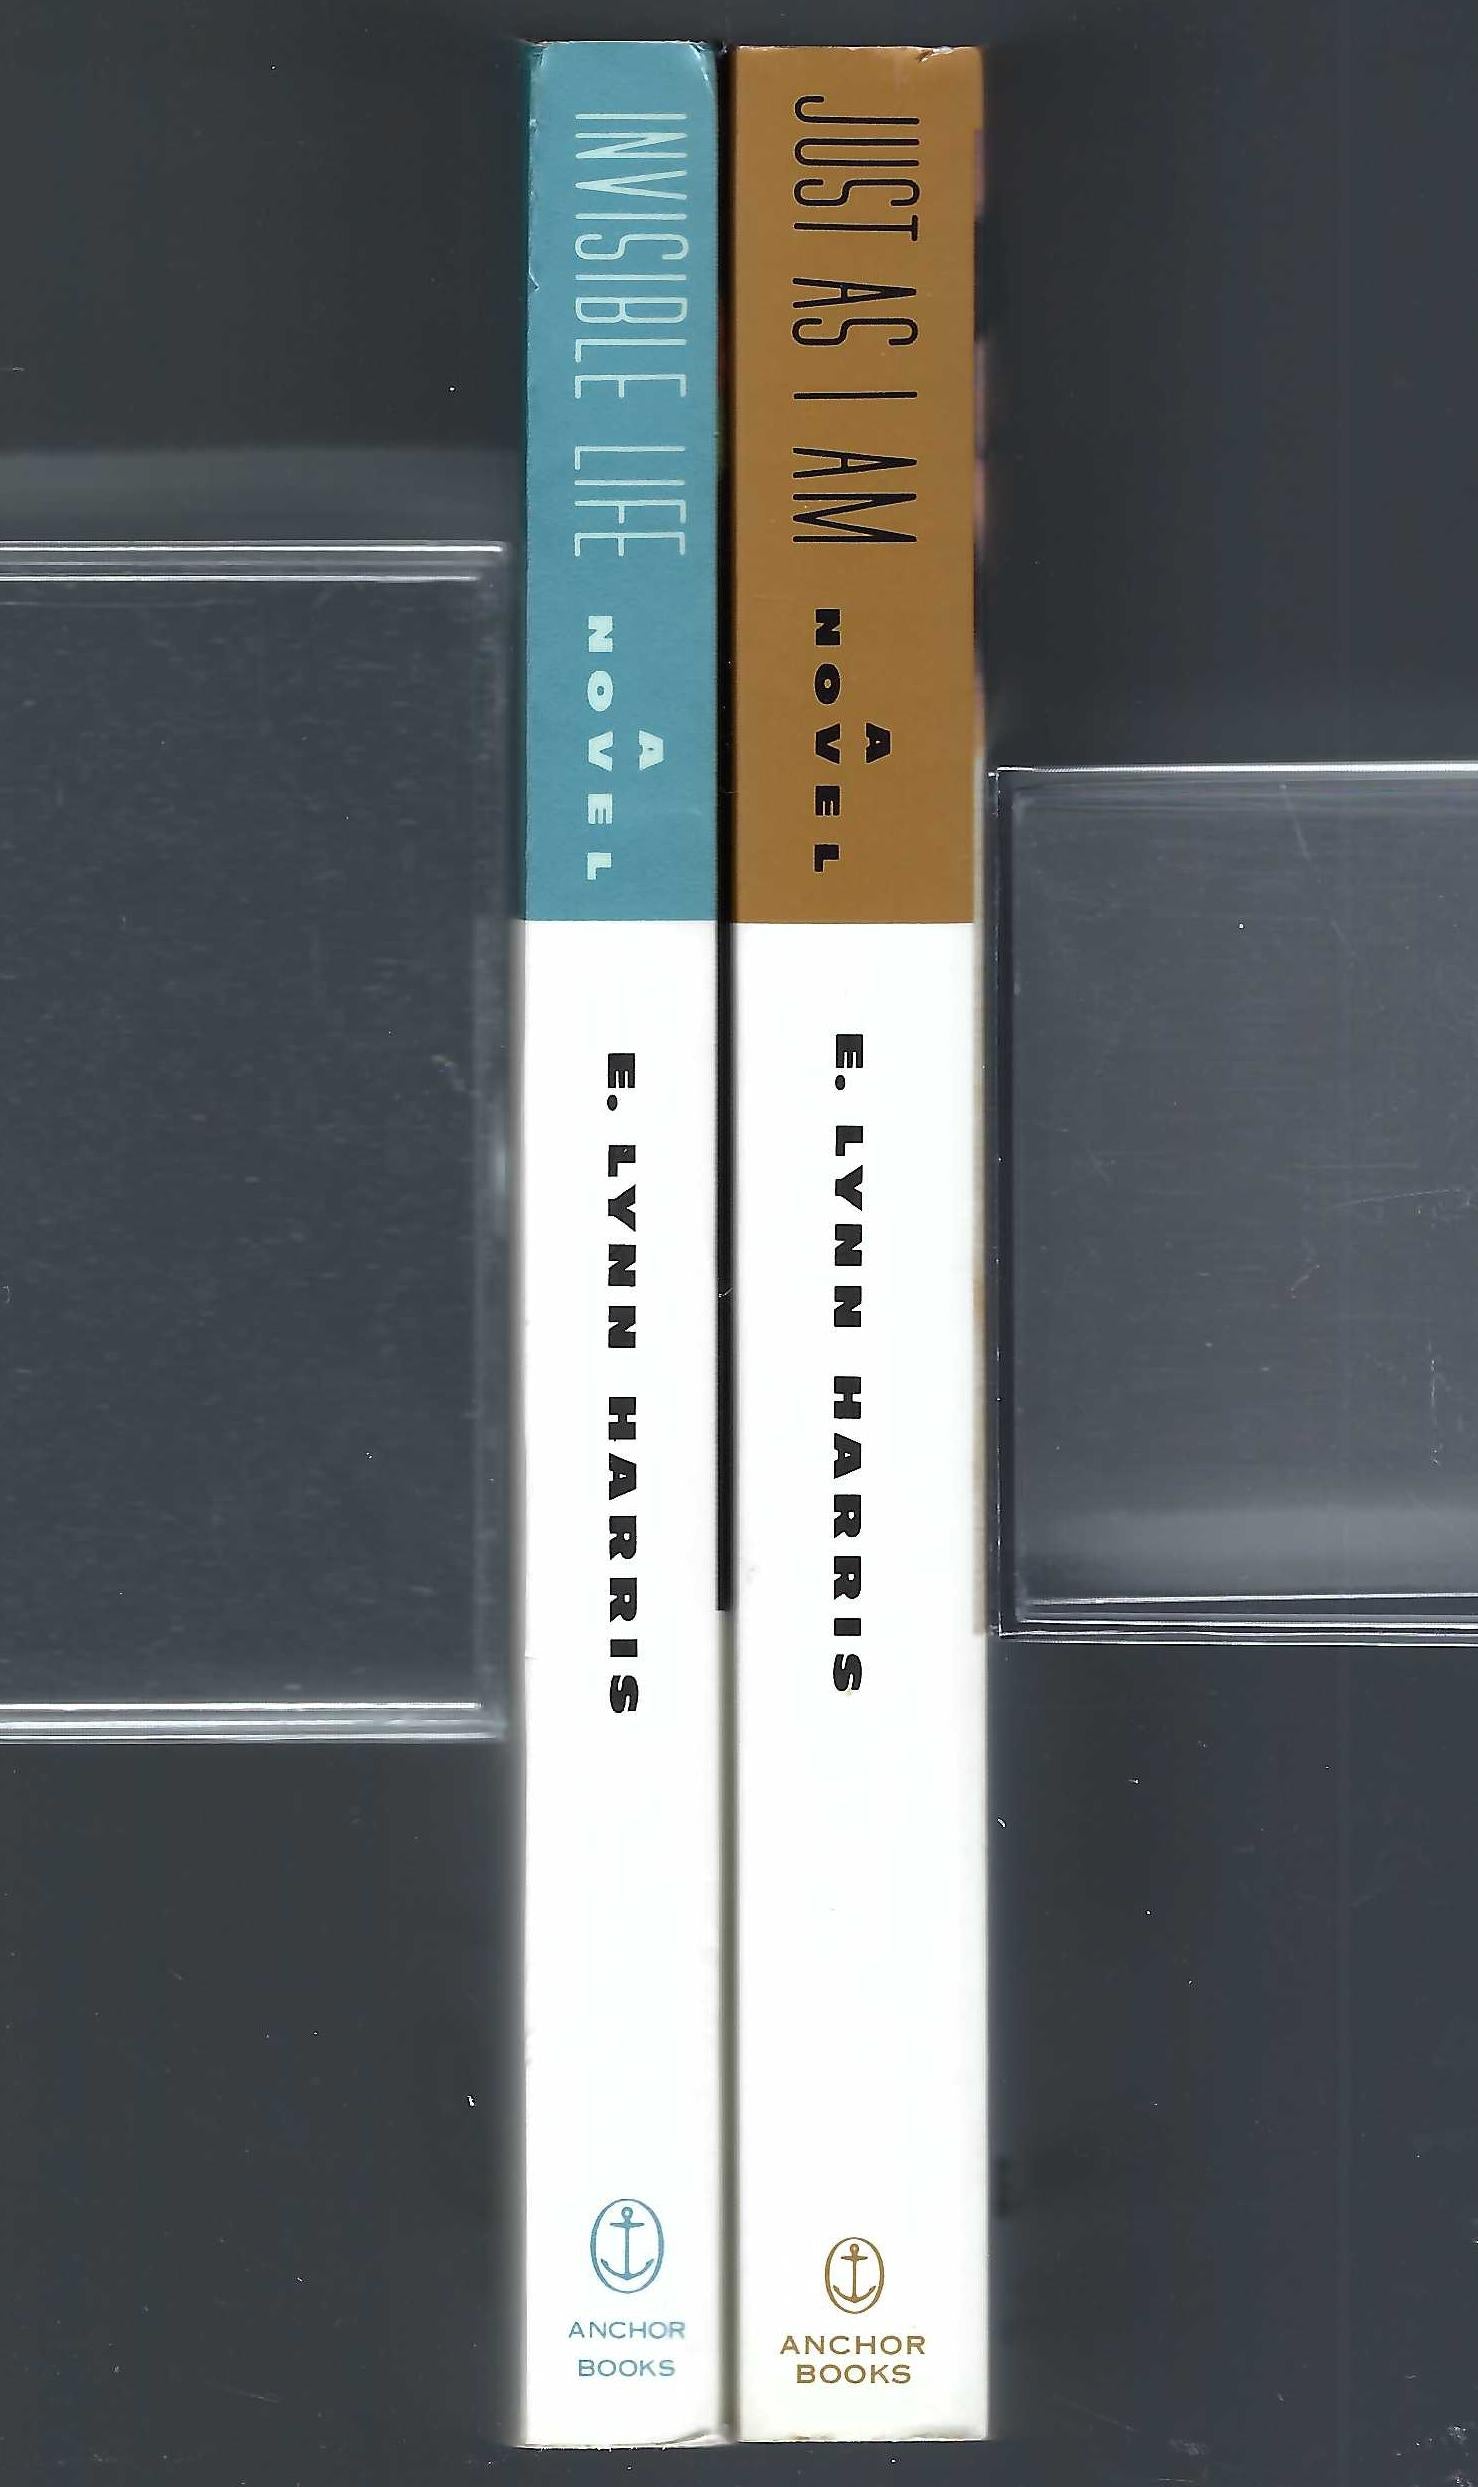 spines of both books